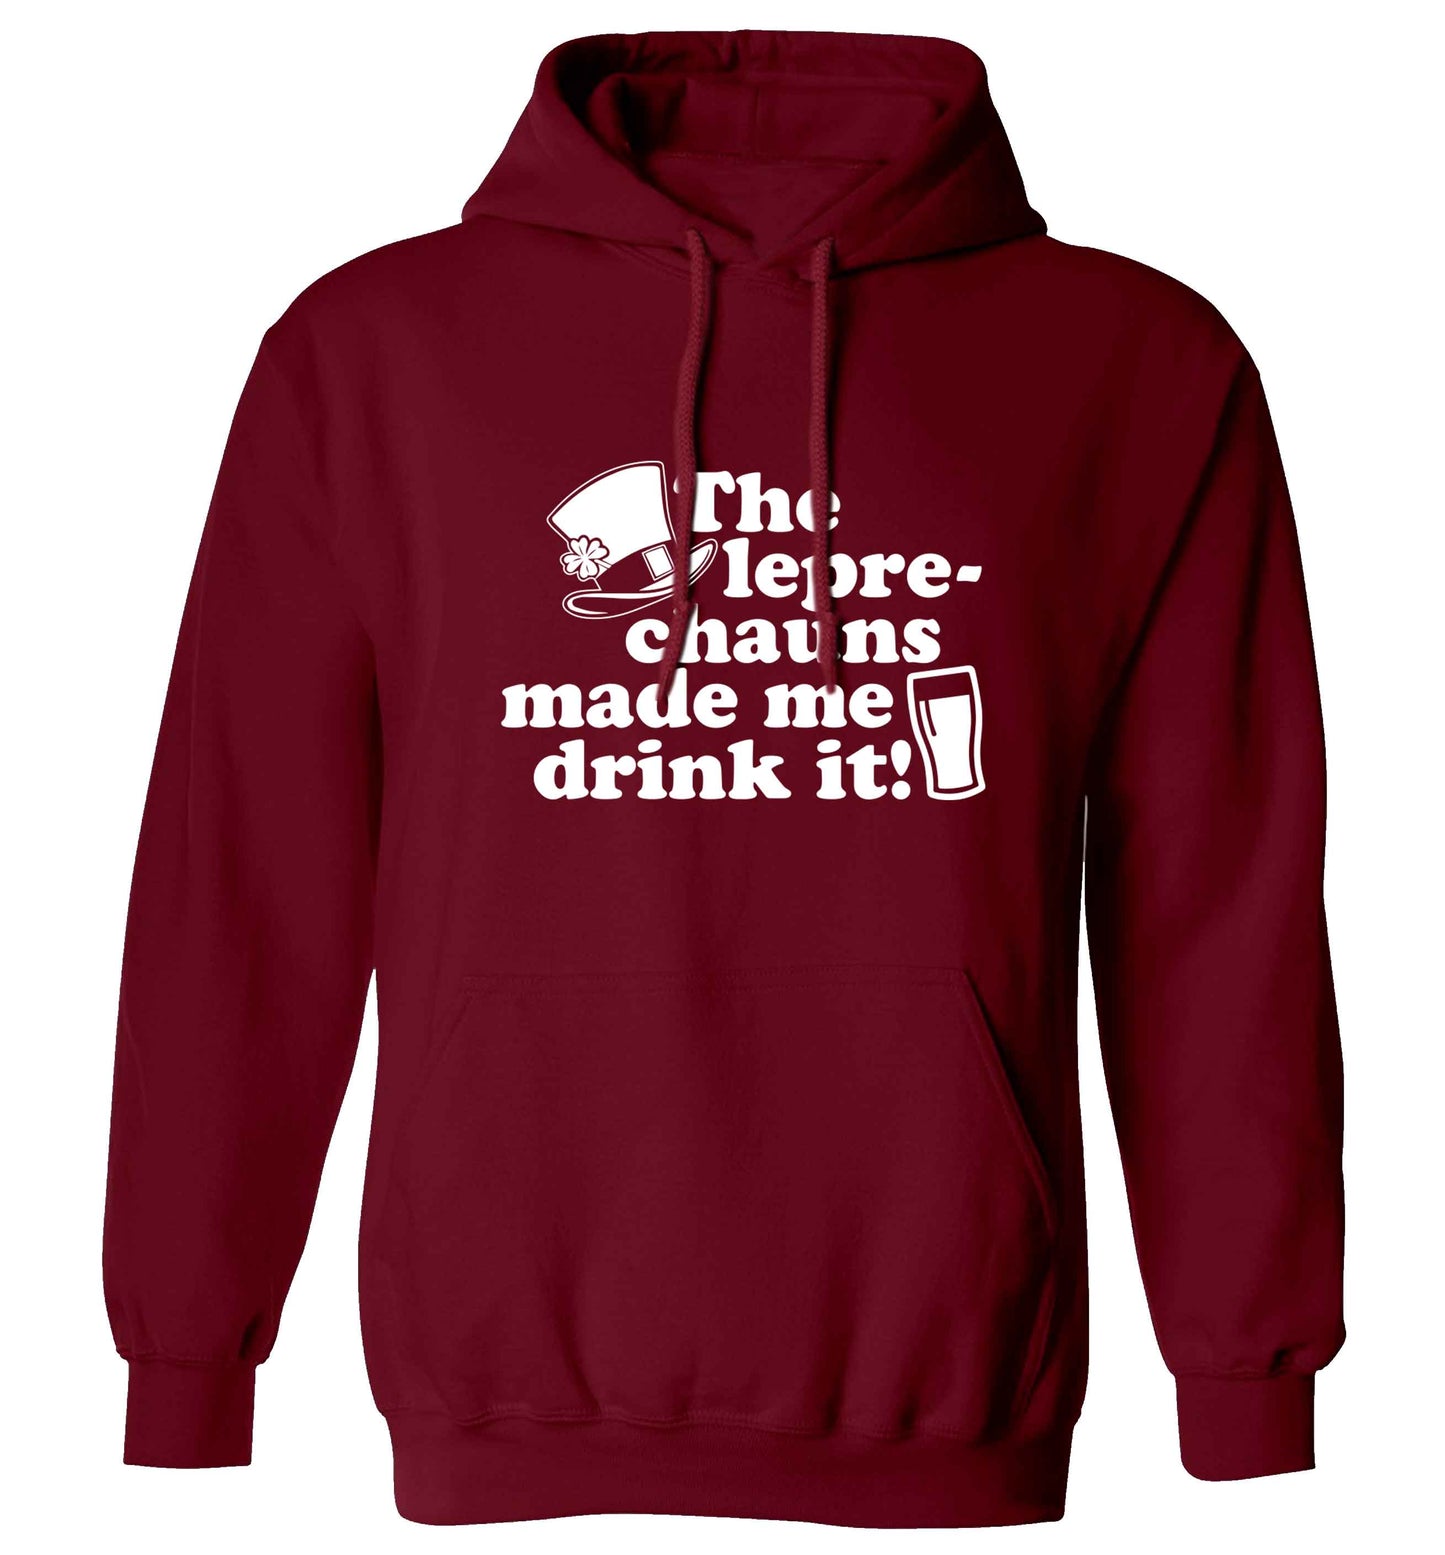 The leprechauns made me drink it adults unisex maroon hoodie 2XL